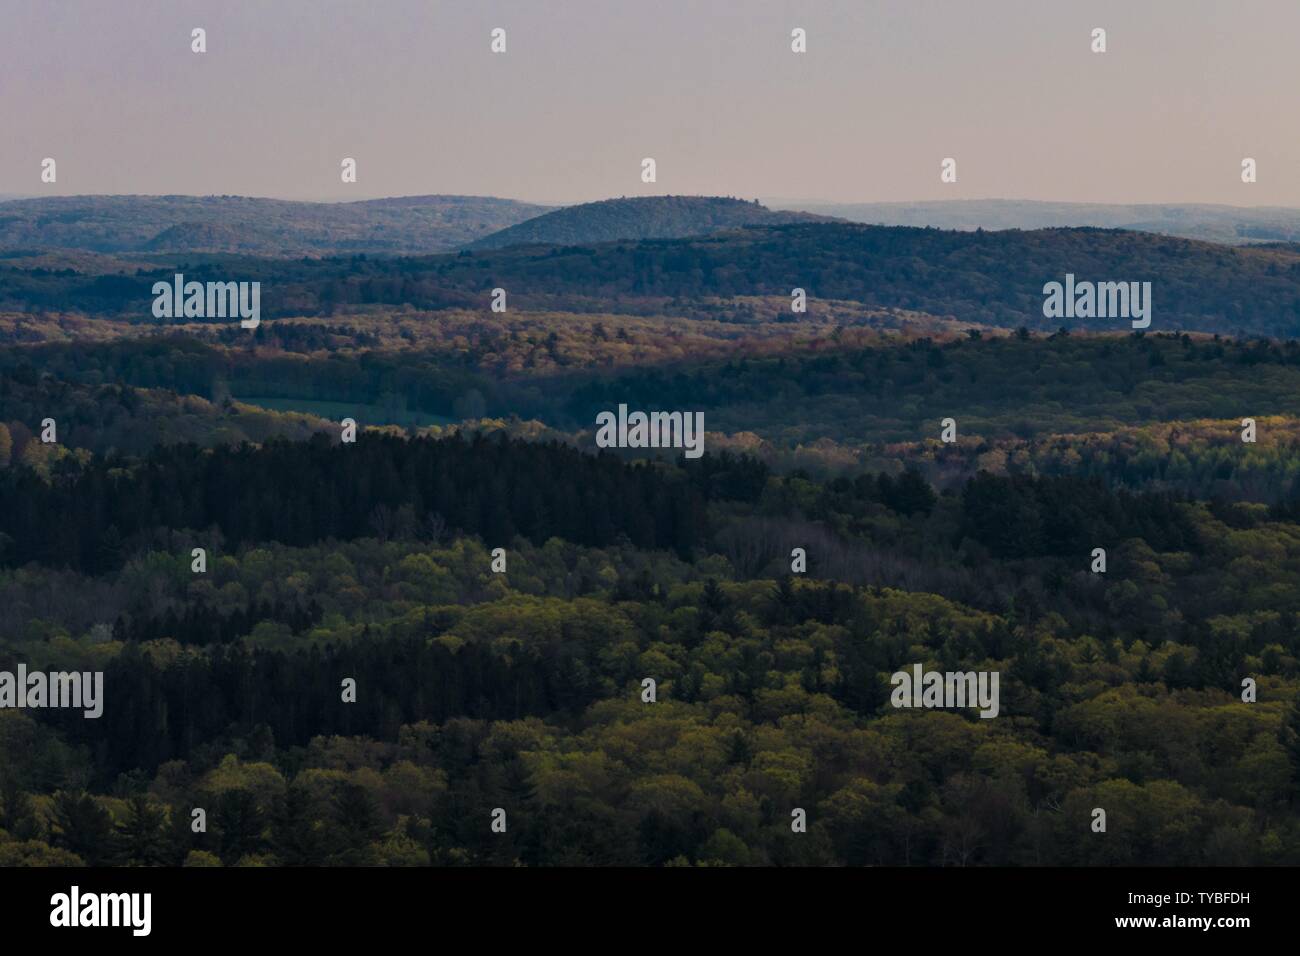 Cornwall, Connecticut, USA The view over the Berkshire Hills from Mohawk Mountain. - 2019 | usage worldwide Stock Photo